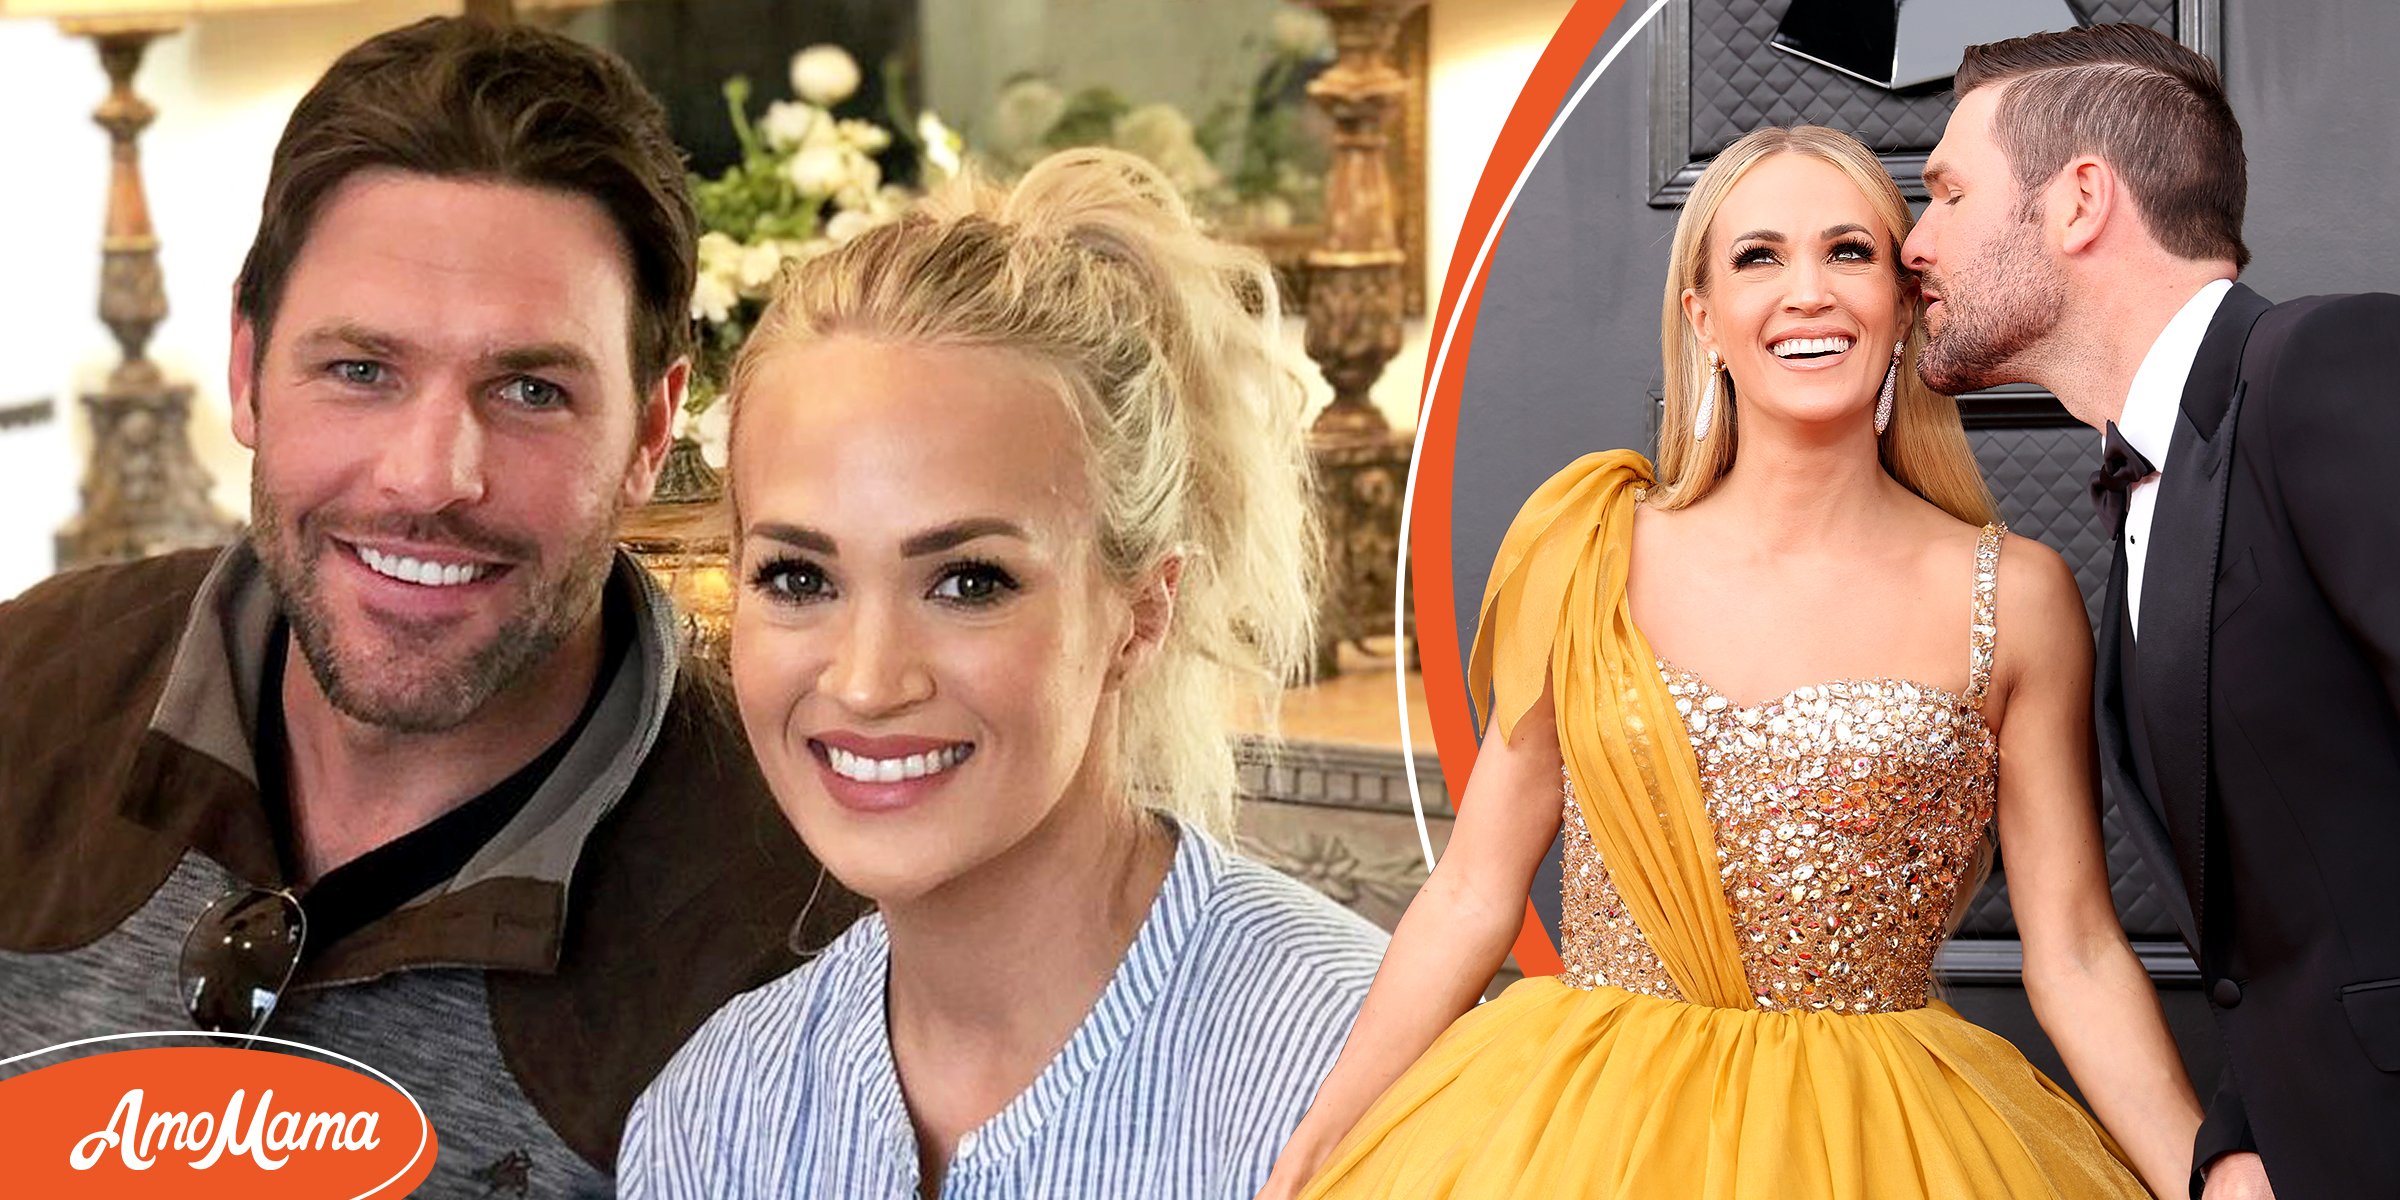 Carrie Underwood Hesitated Meeting Husband Who Kissed Her on 1st Date — He Calls Her ‘Best’ Wife 12 Years Later